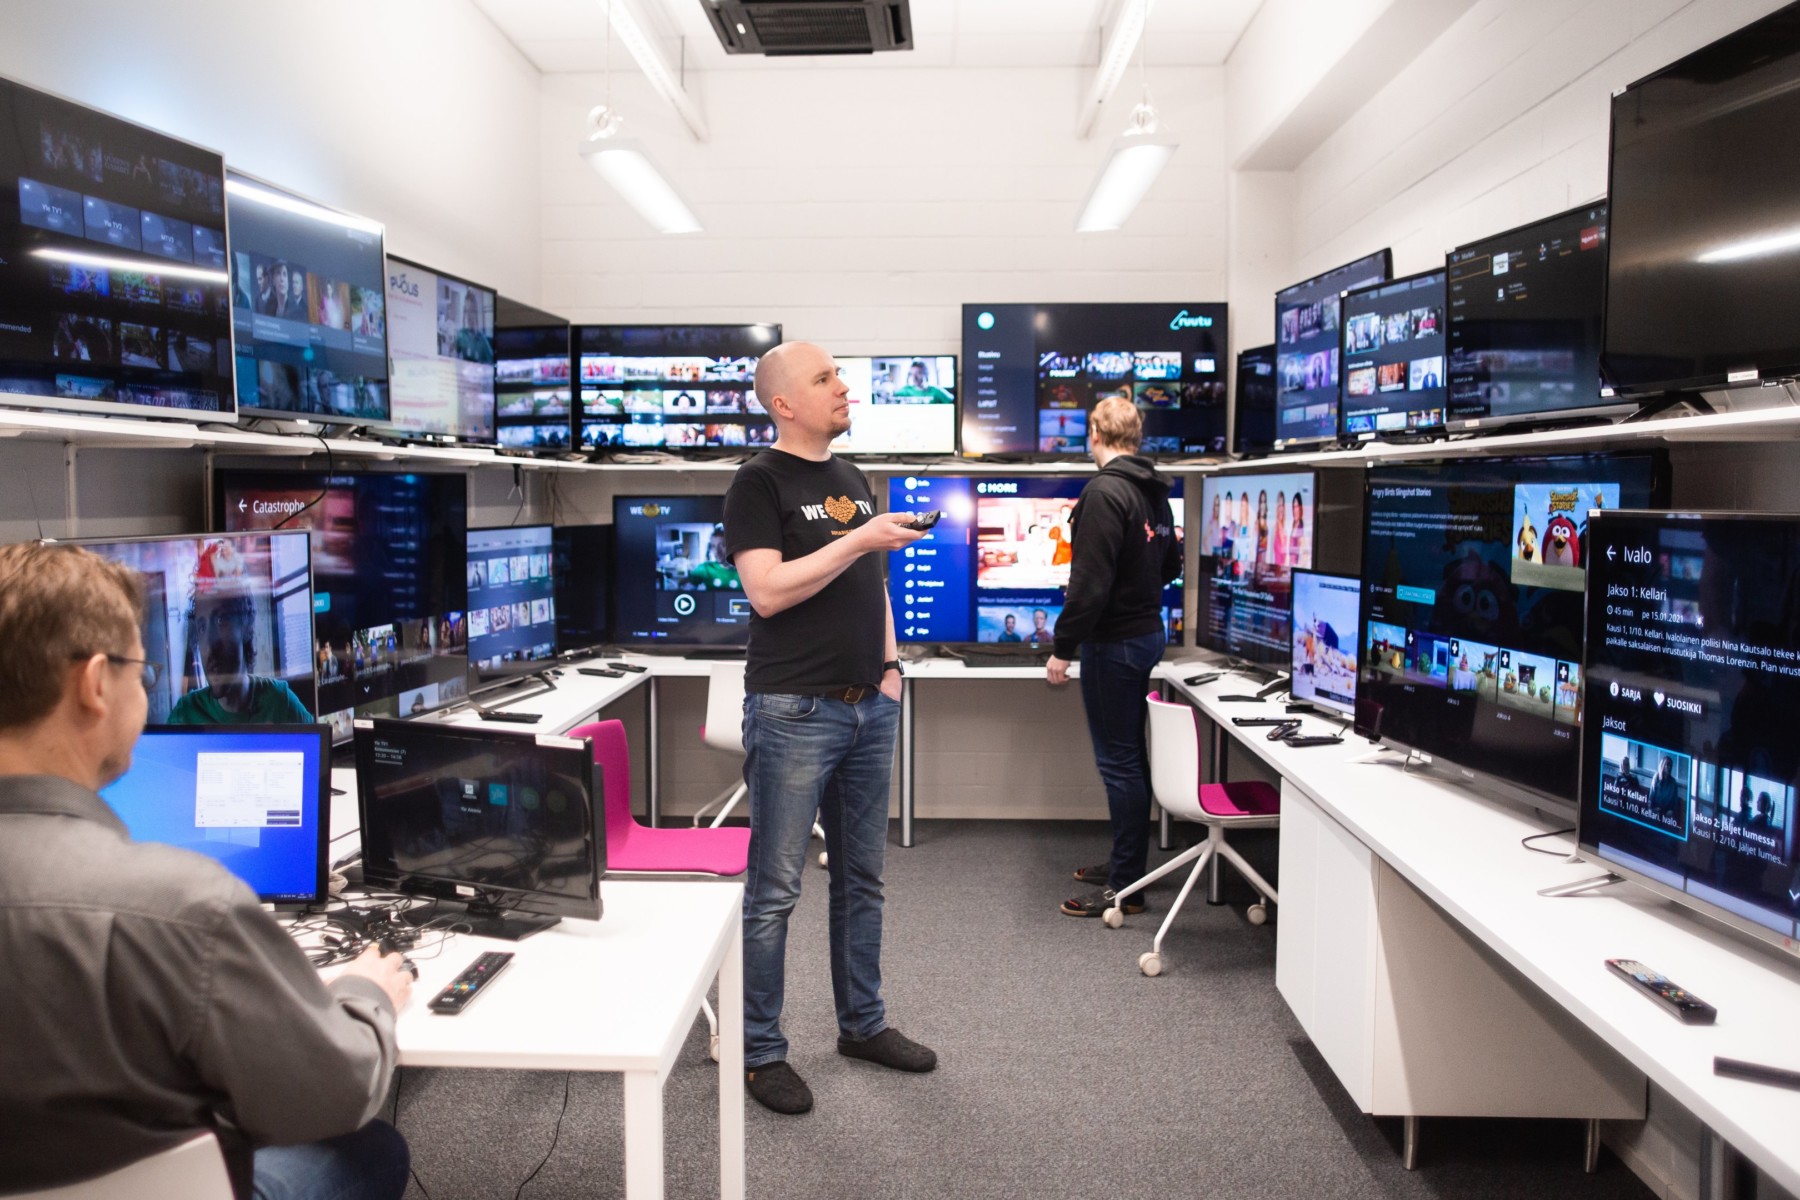 Several men work in a room where all the walls are lined with shelves holding various TV screens.